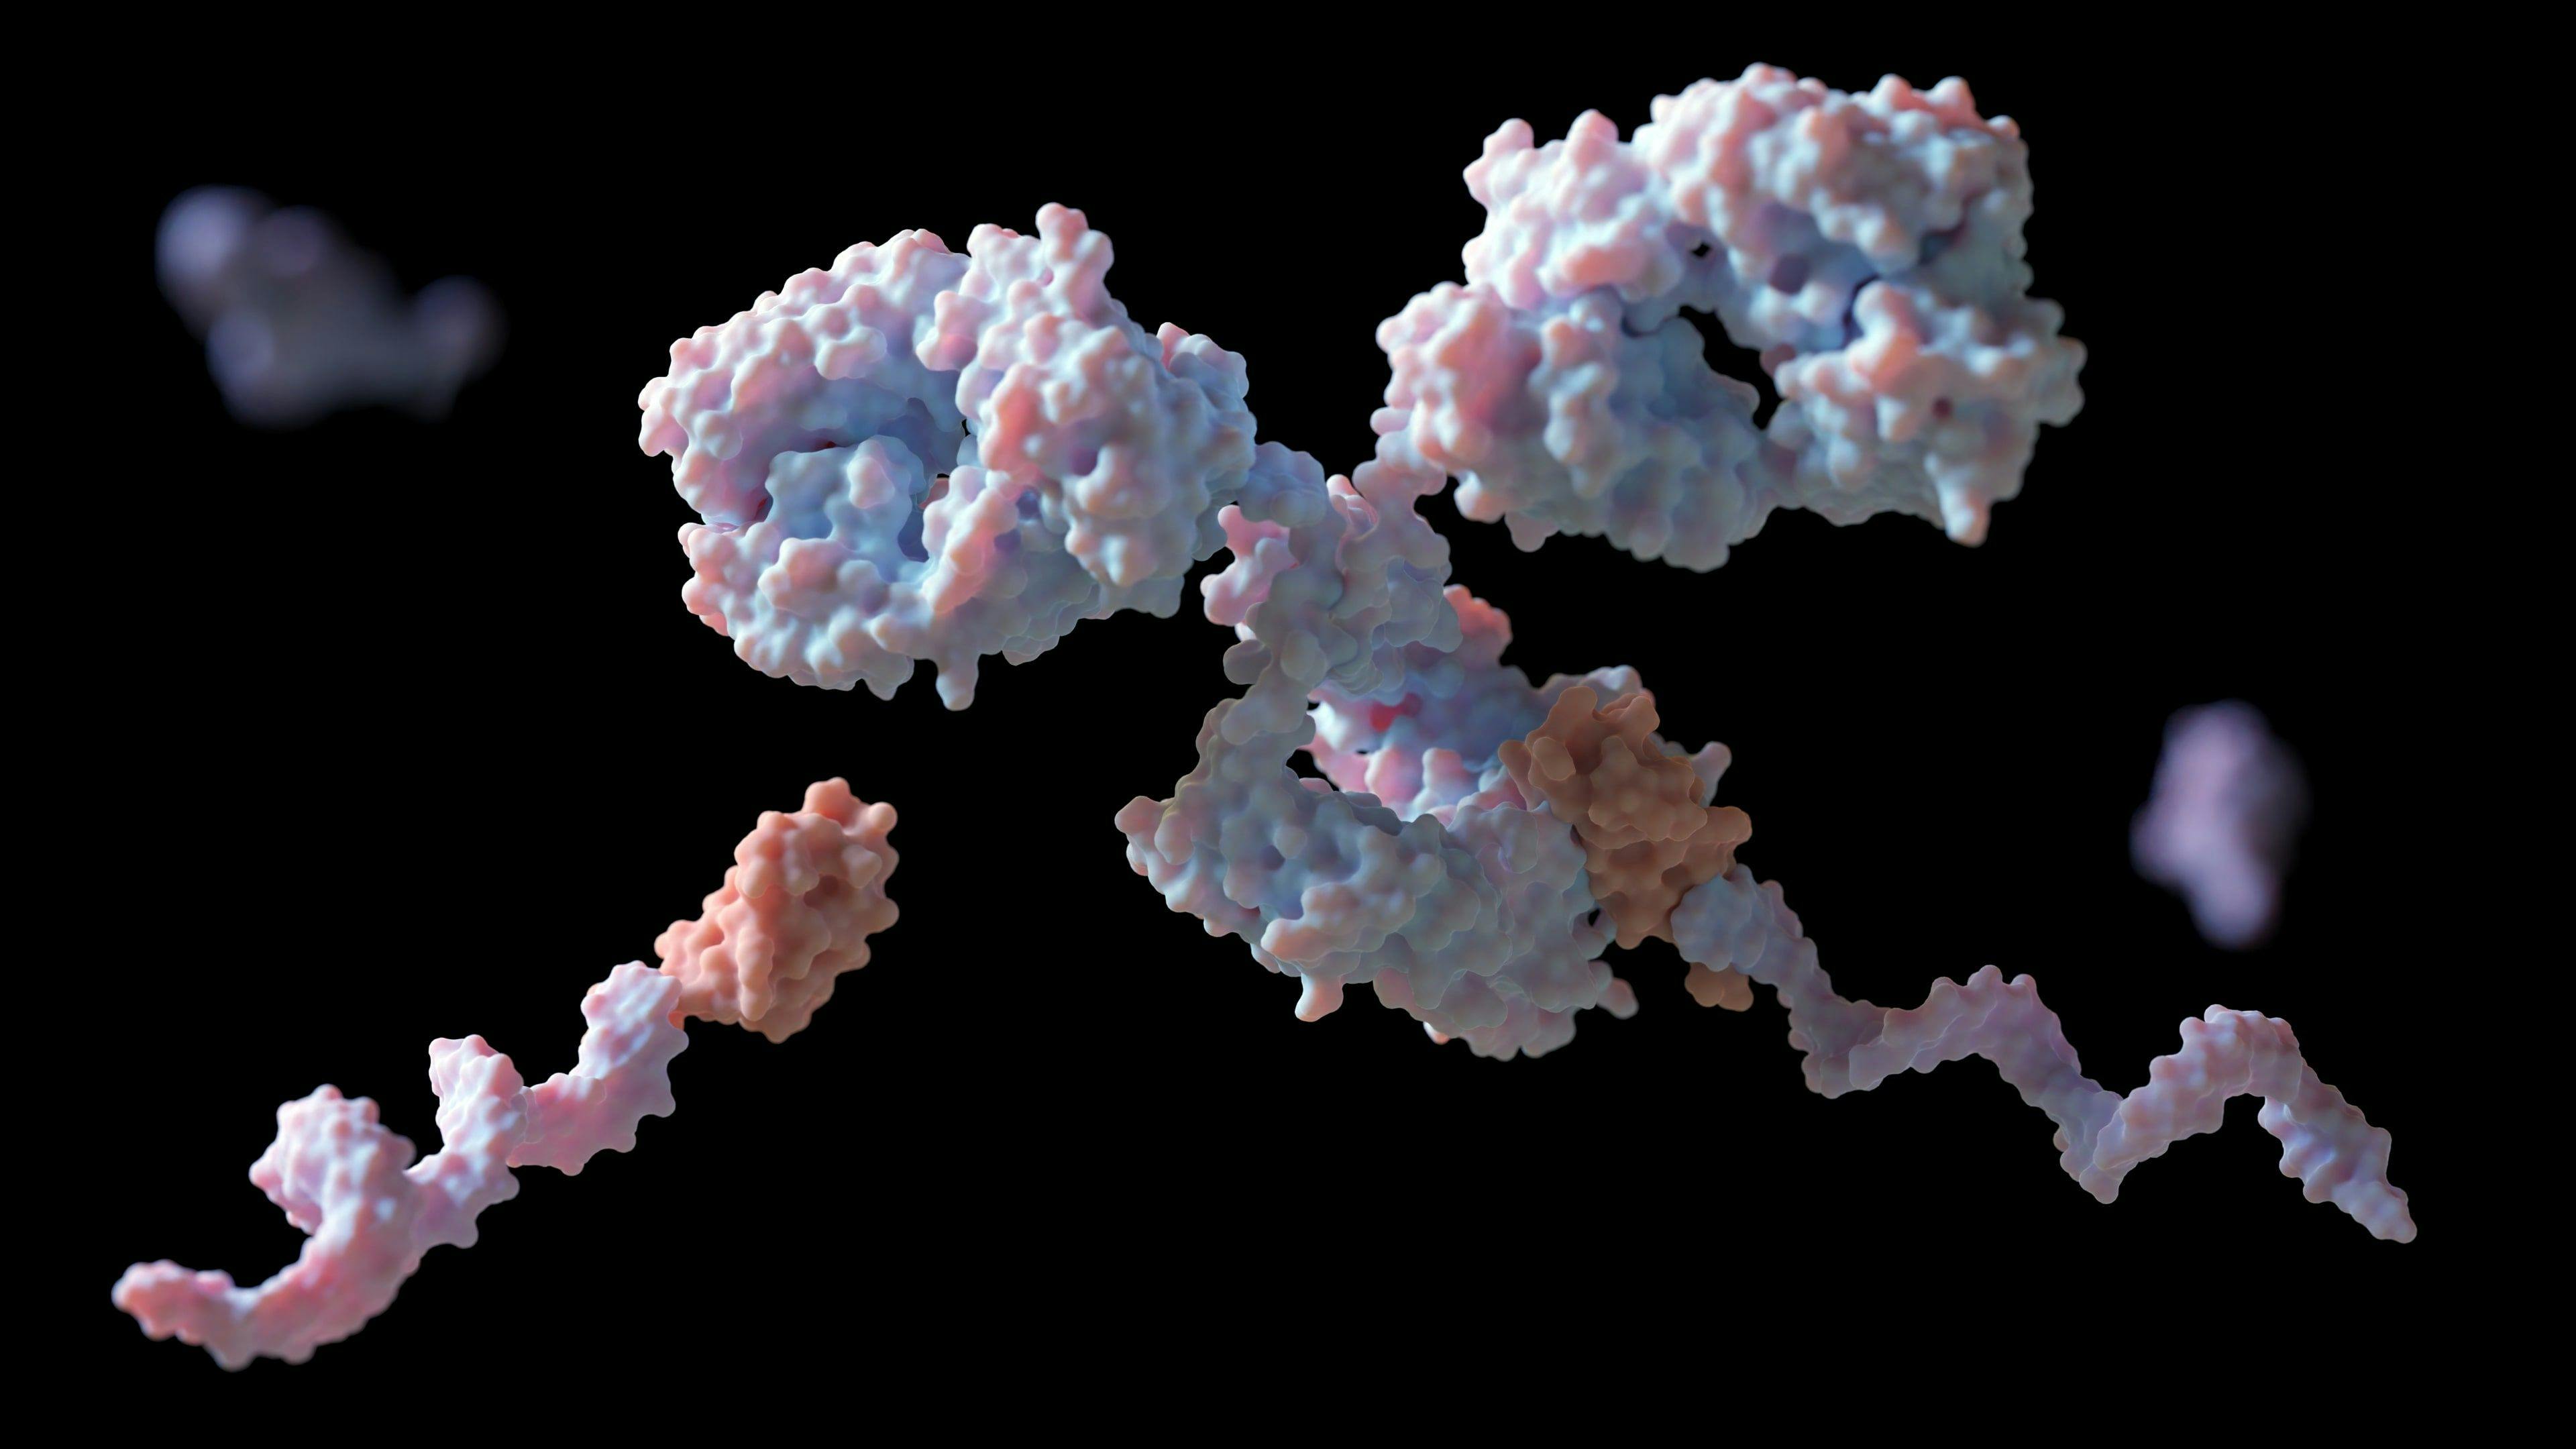 Conjugal of DNA to primary antibodies with protein G and linker for multiplexed cellular targeting: 3D rendering | Image Credit: © Love Employee - stock.adobe.com